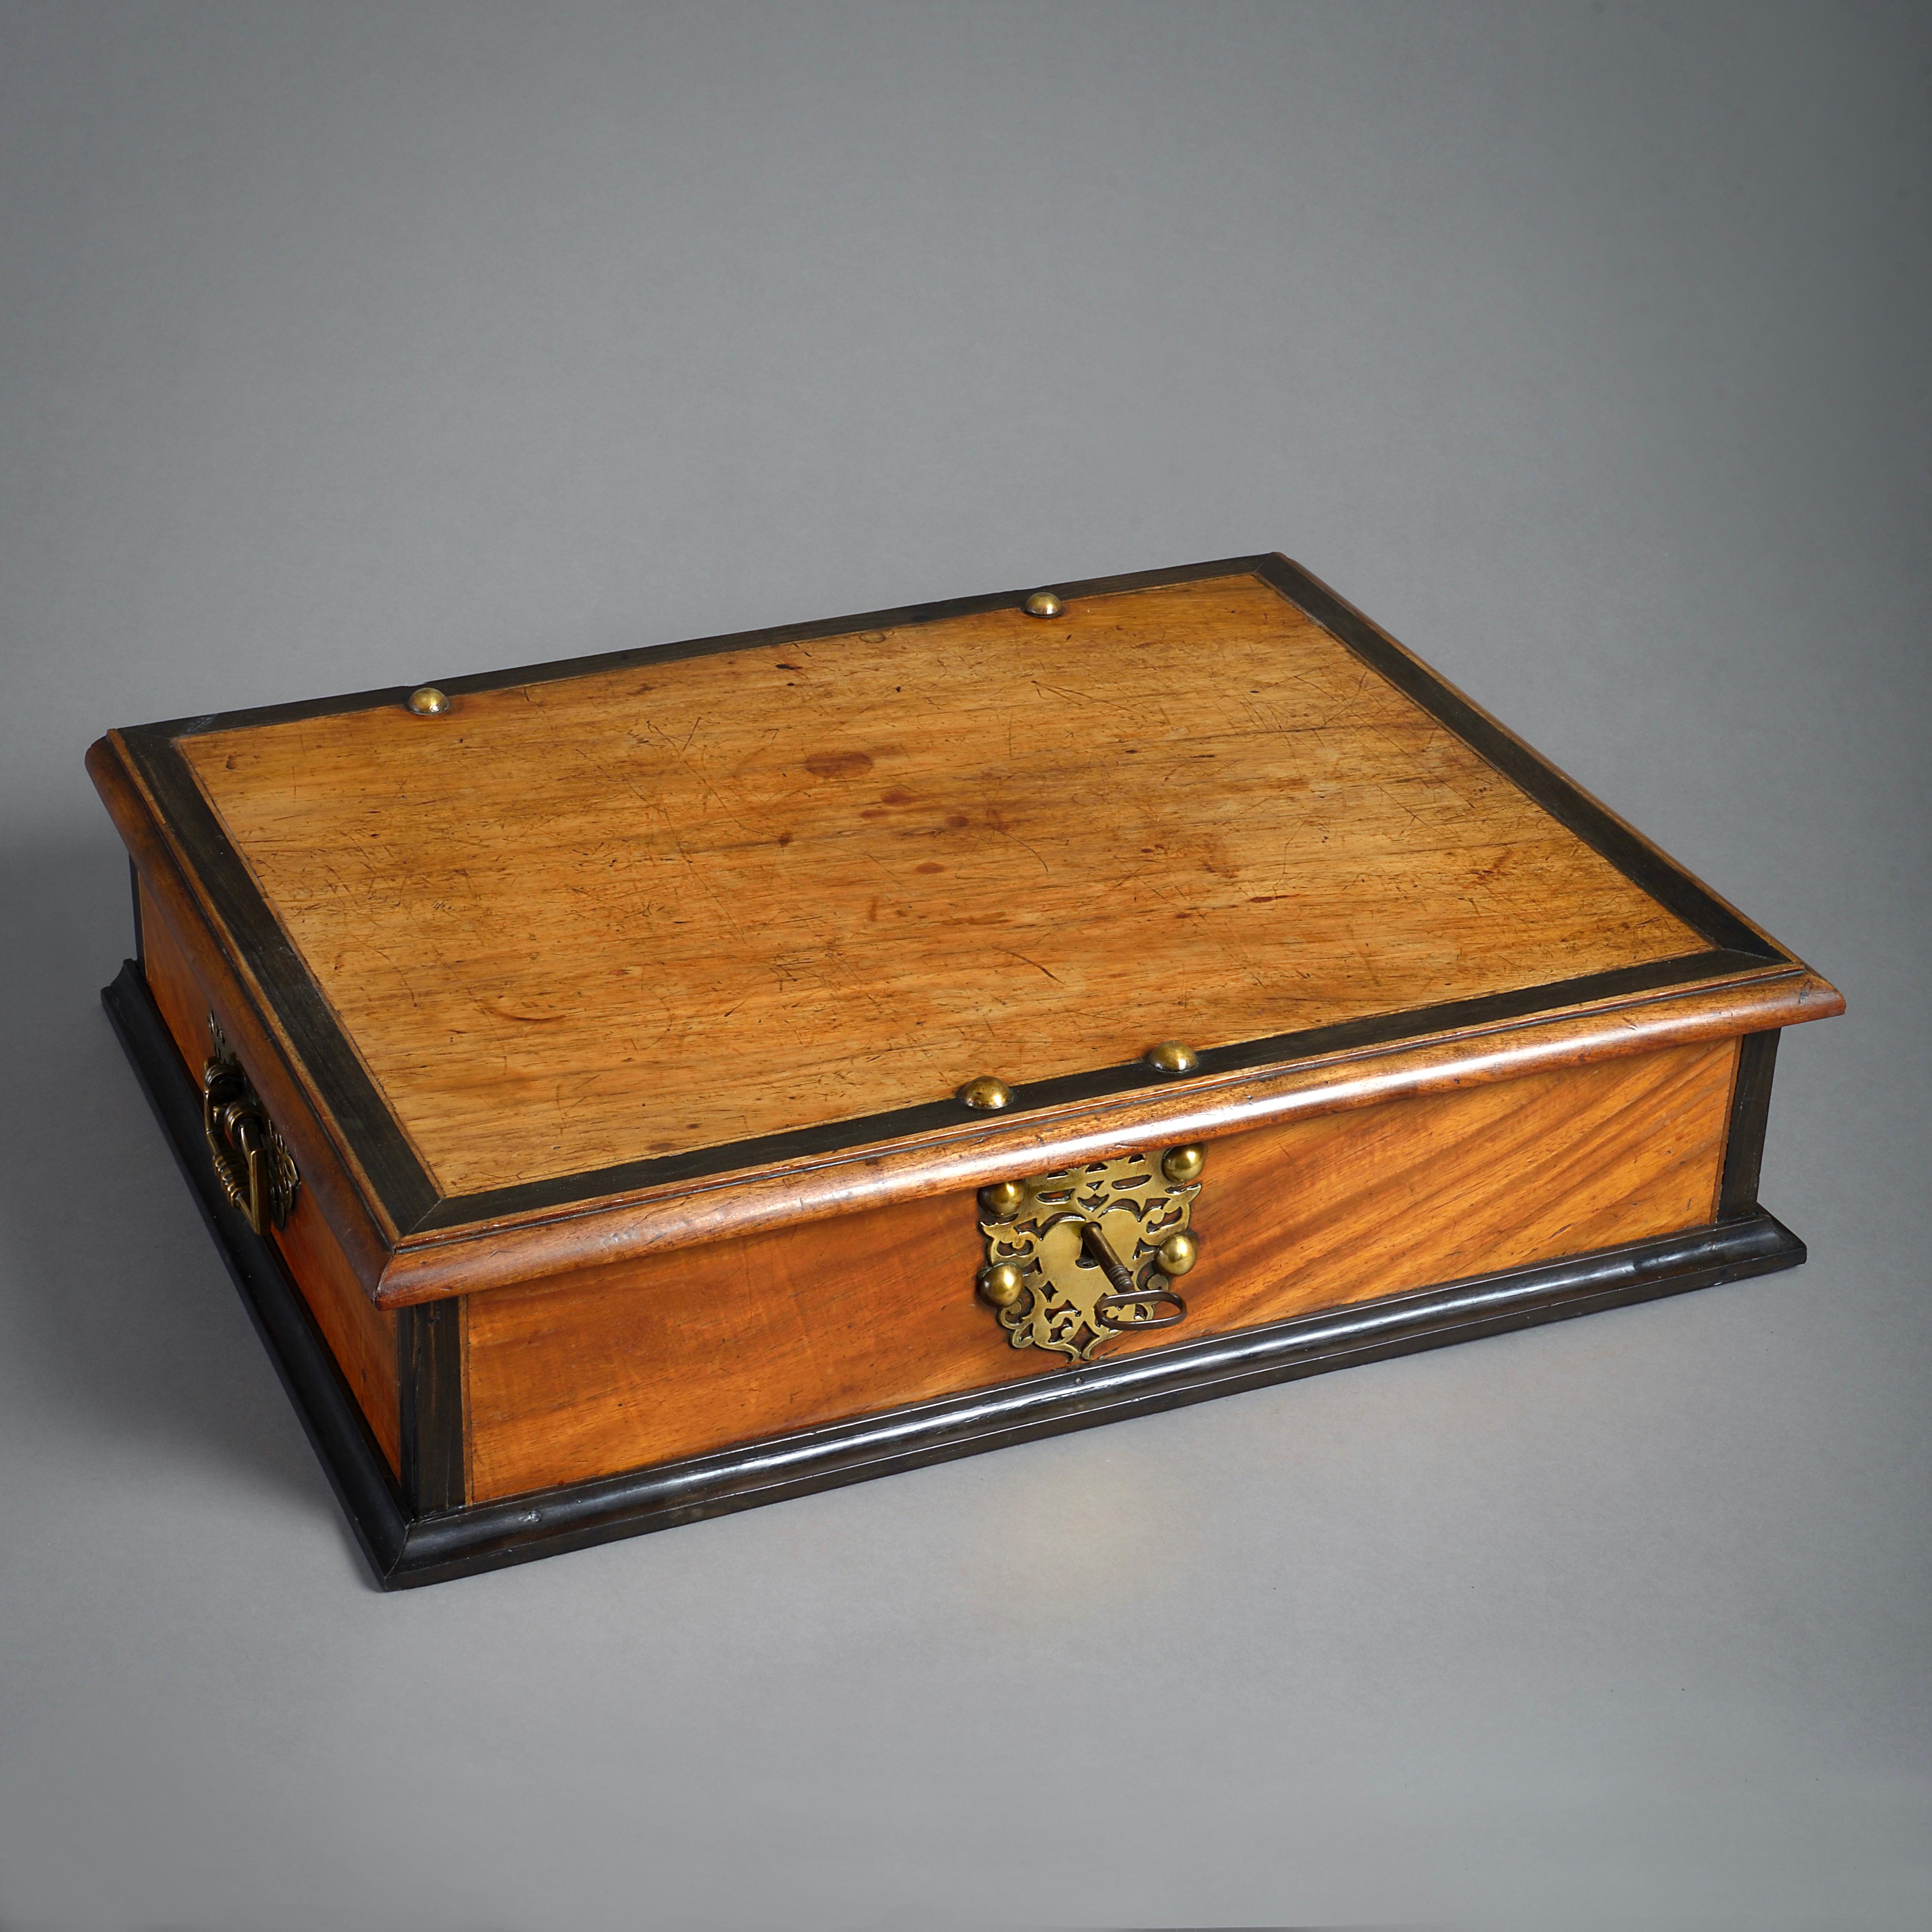 An Anglo-Indian brass-mounted padouk and ebony box, Ceylon, second half of the 18th century.